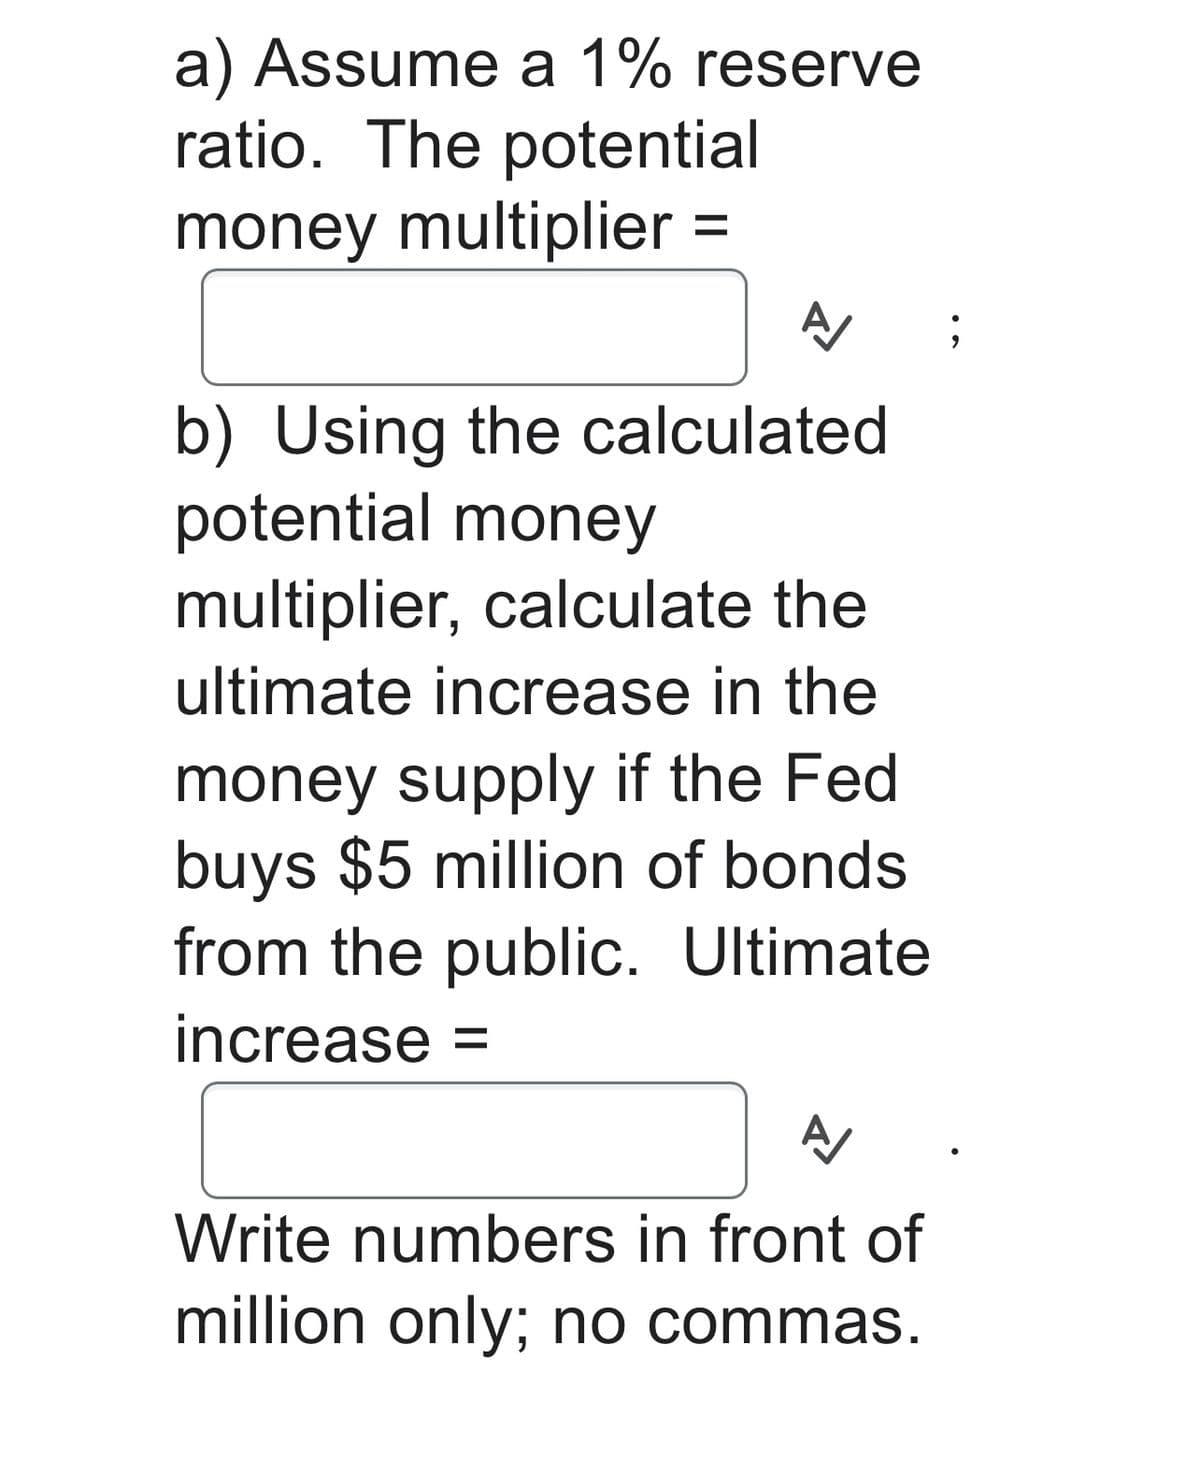 a) Assume a 1% reserve
ratio. The potential
money multiplier =
A
b) Using the calculated
potential money
multiplier, calculate the
ultimate increase in the
money supply if the Fed
buys $5 million of bonds
from the public. Ultimate
increase =
A
Write numbers in front of
million only; no commas.